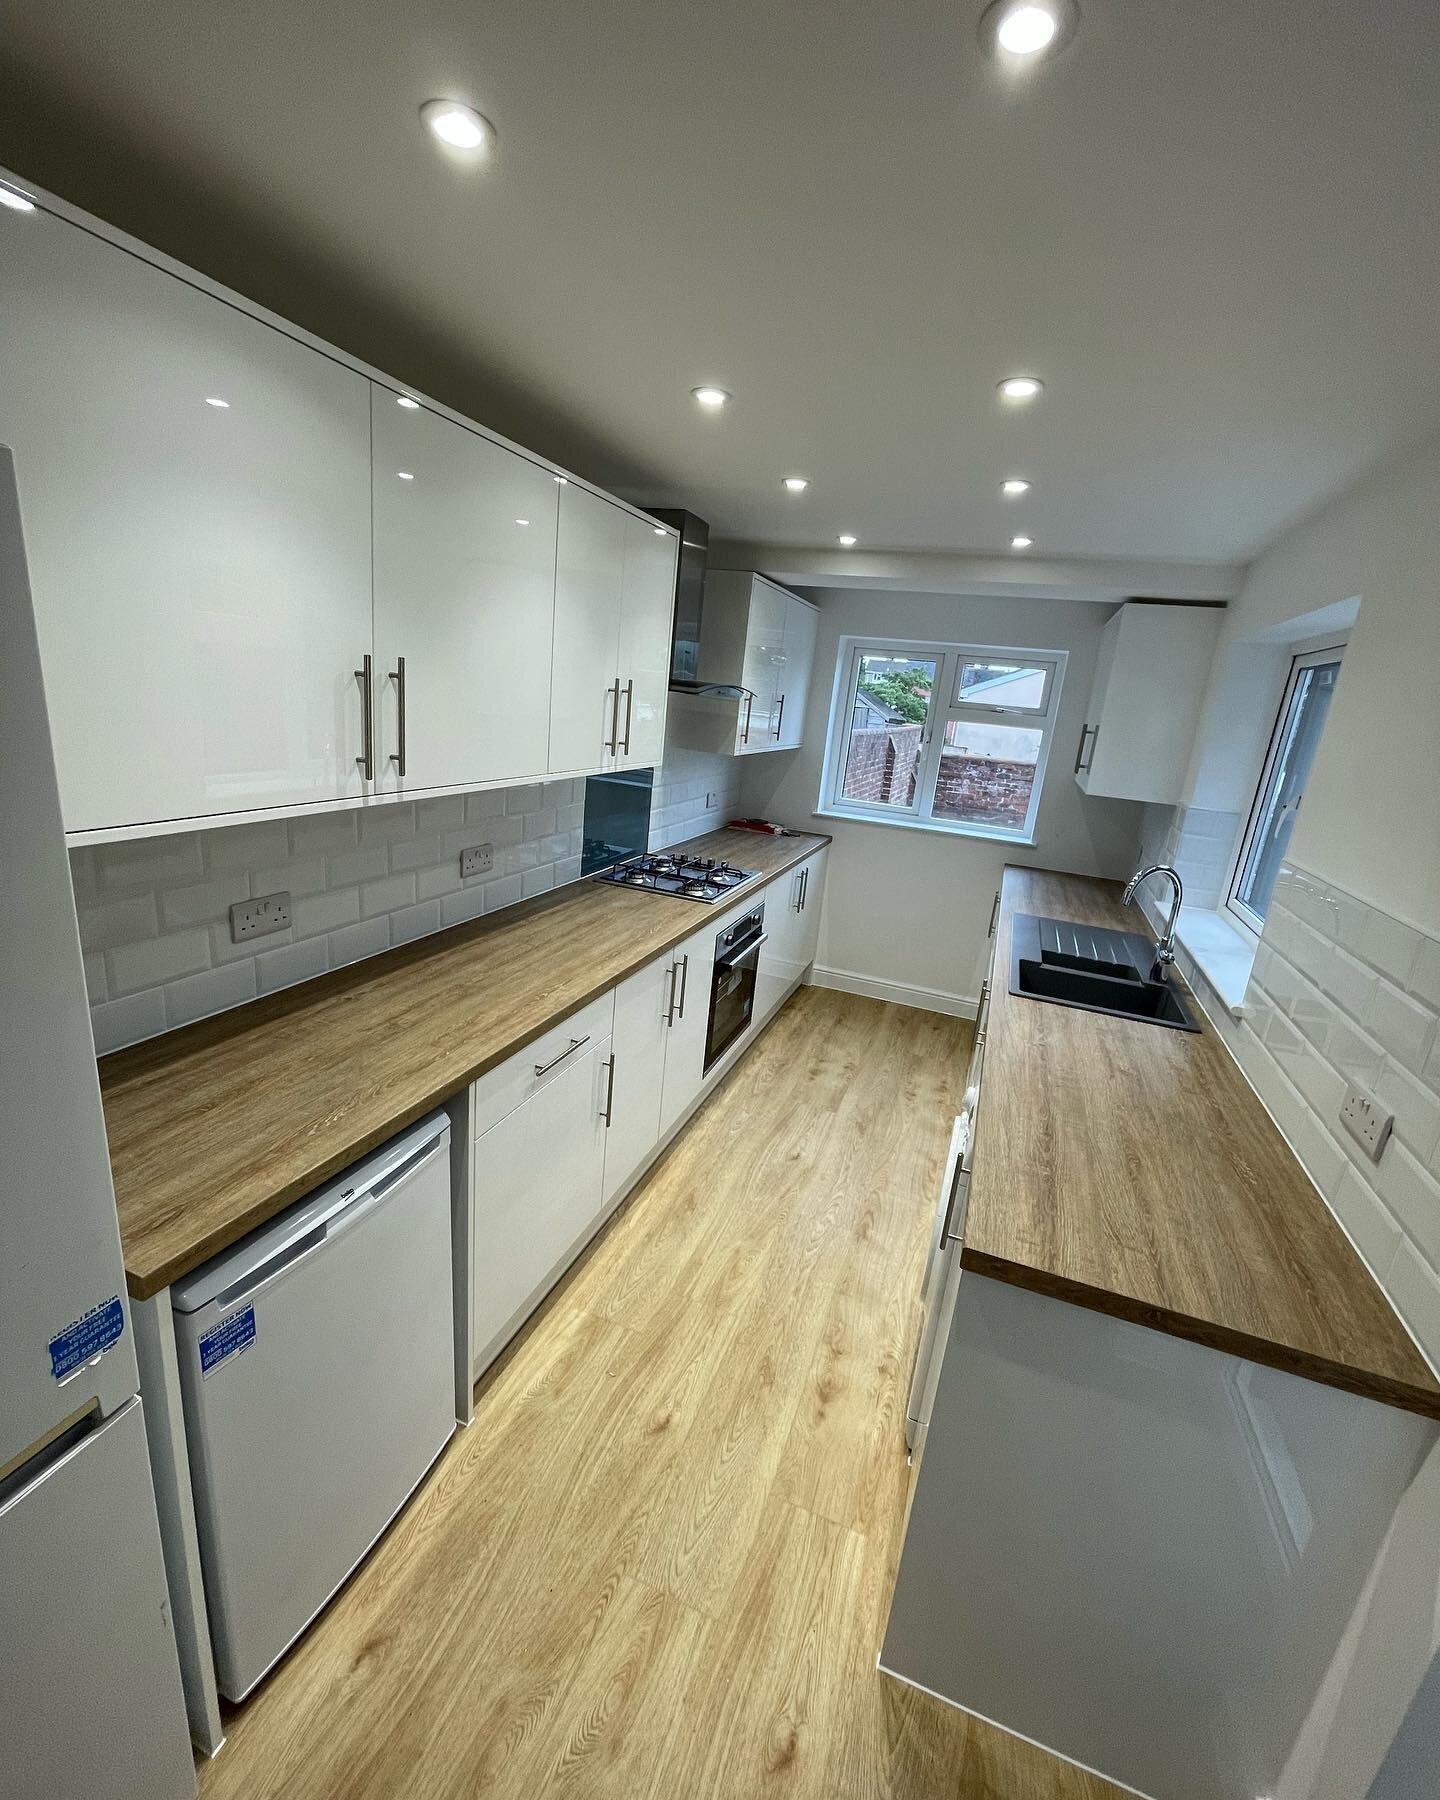 1 of two kitchen transformations for a landlord in Exeter. 

Both kitchens in two separate properties were carried out in august before the new tenants moved in. 

We had to rip out the old kitchens back to a bare shell, re plumb and re wire, then re